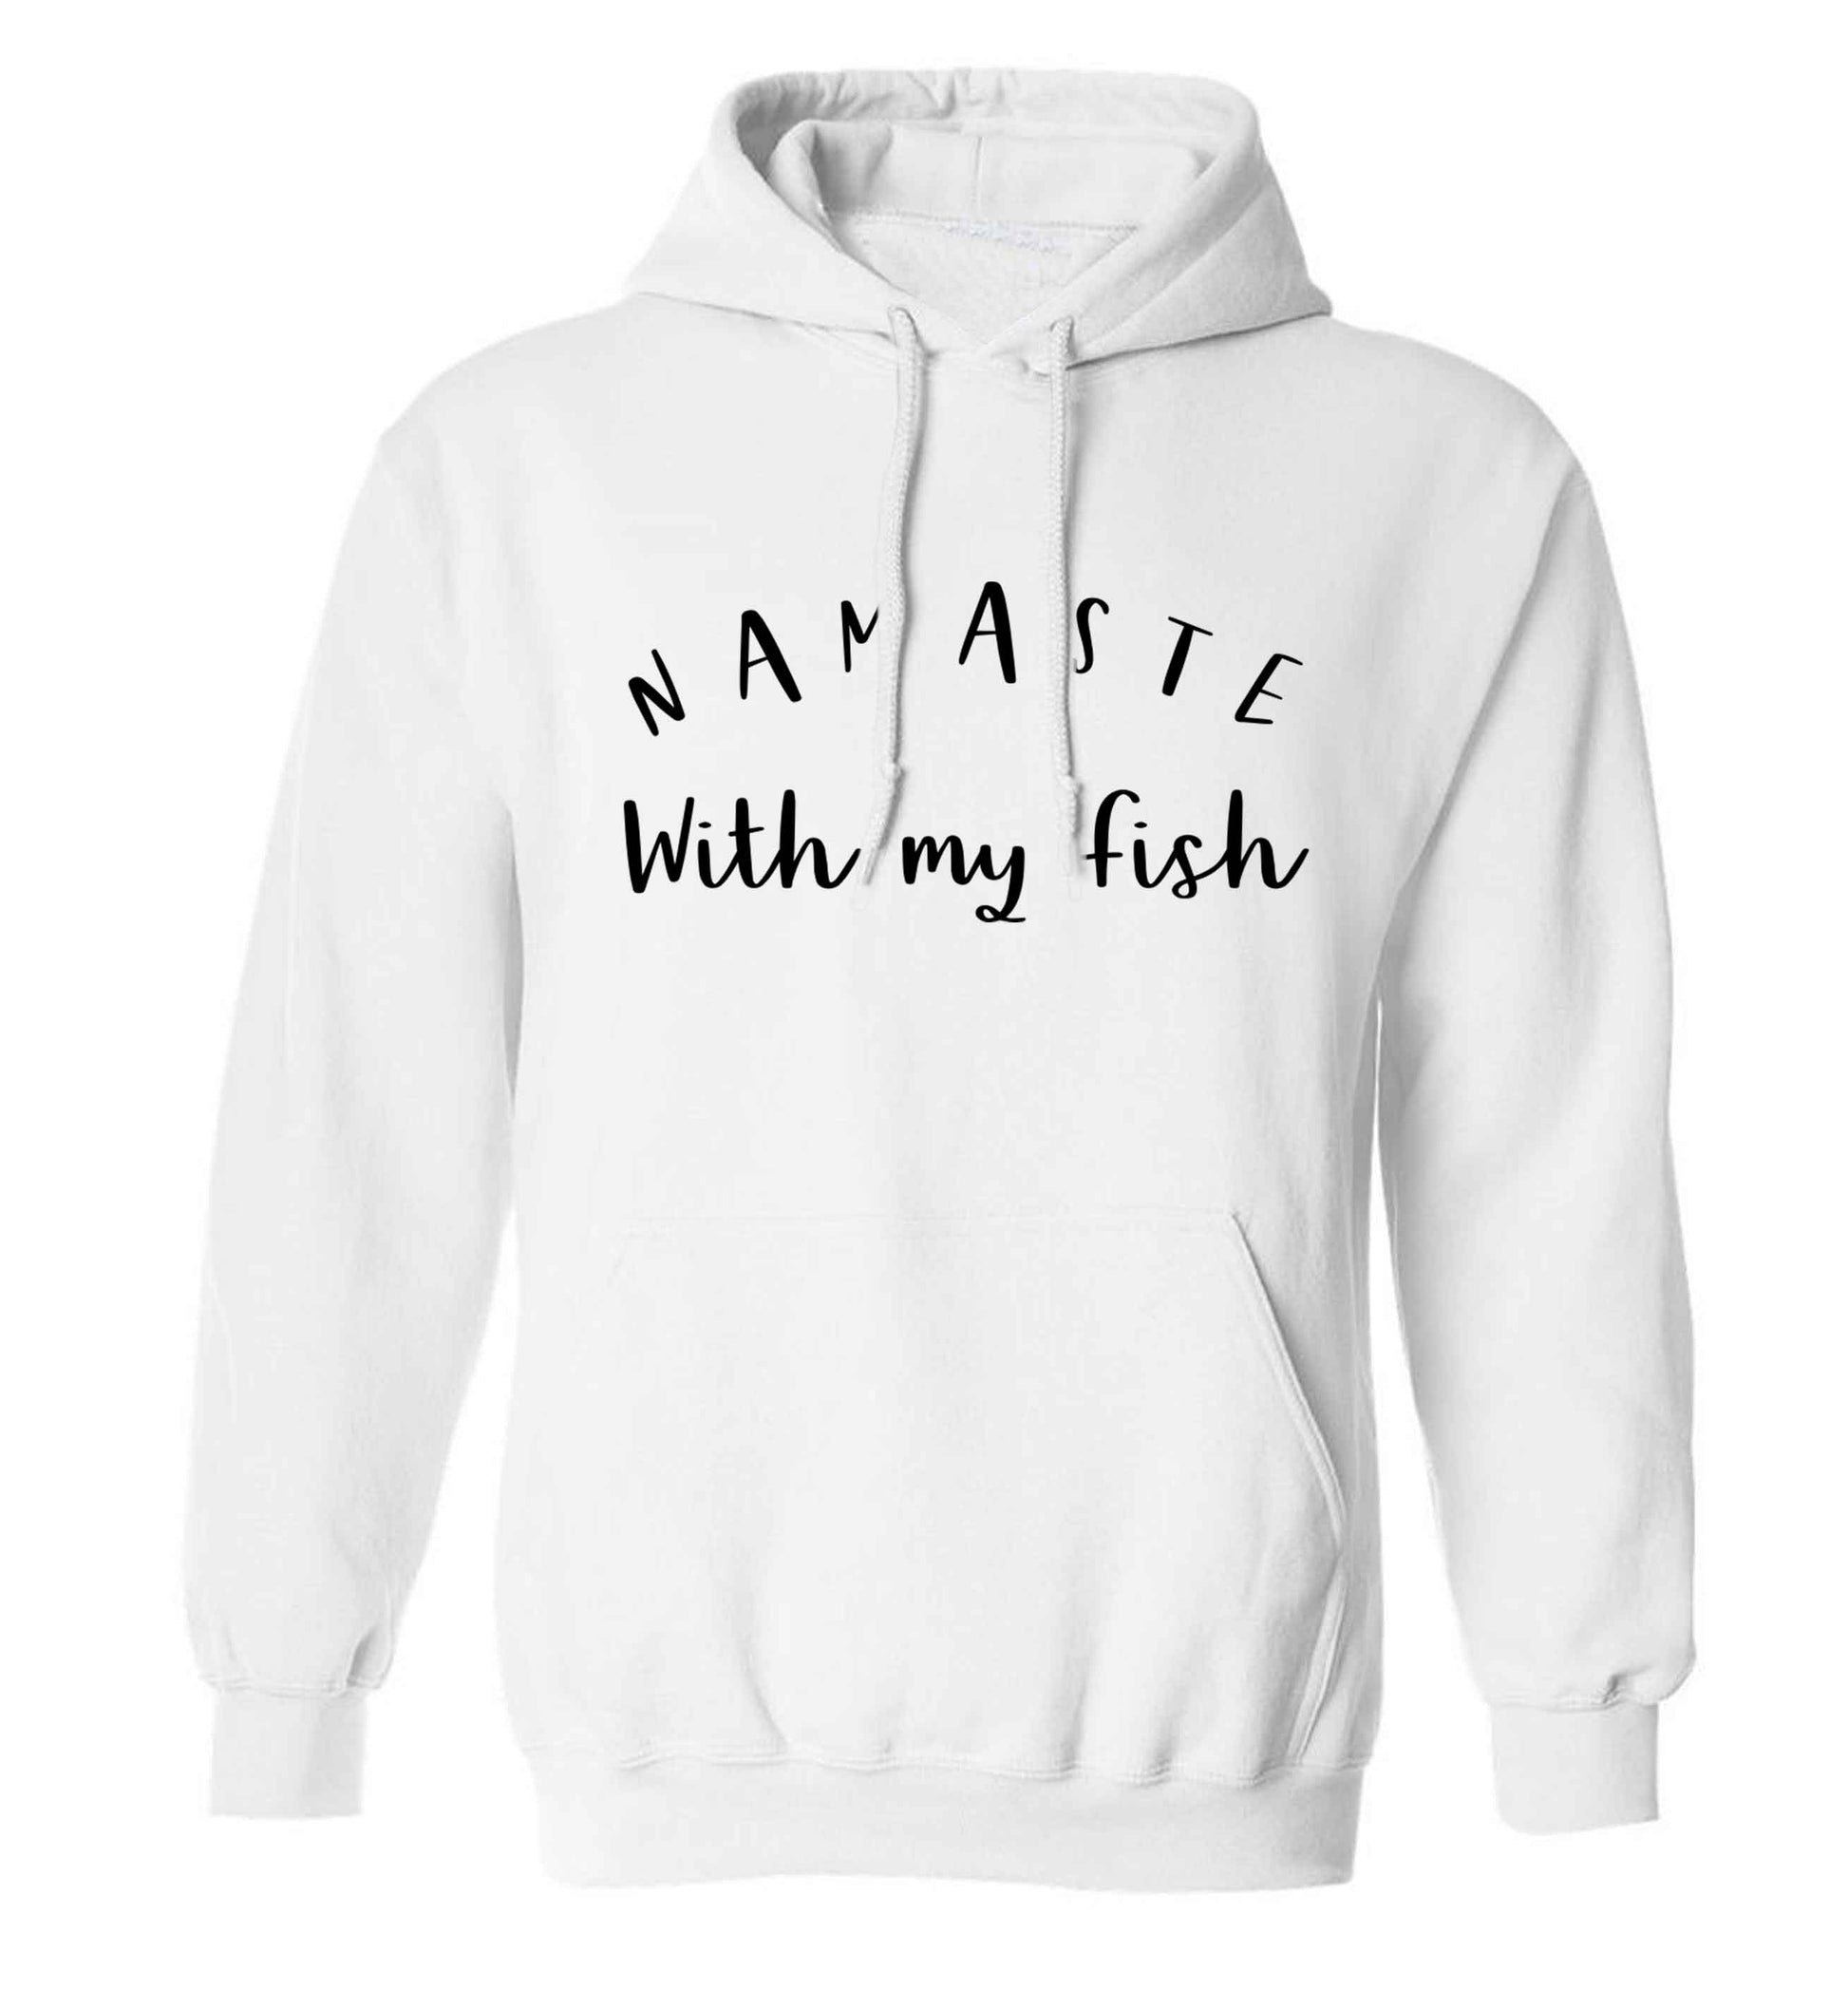 Namaste with my fish adults unisex white hoodie 2XL